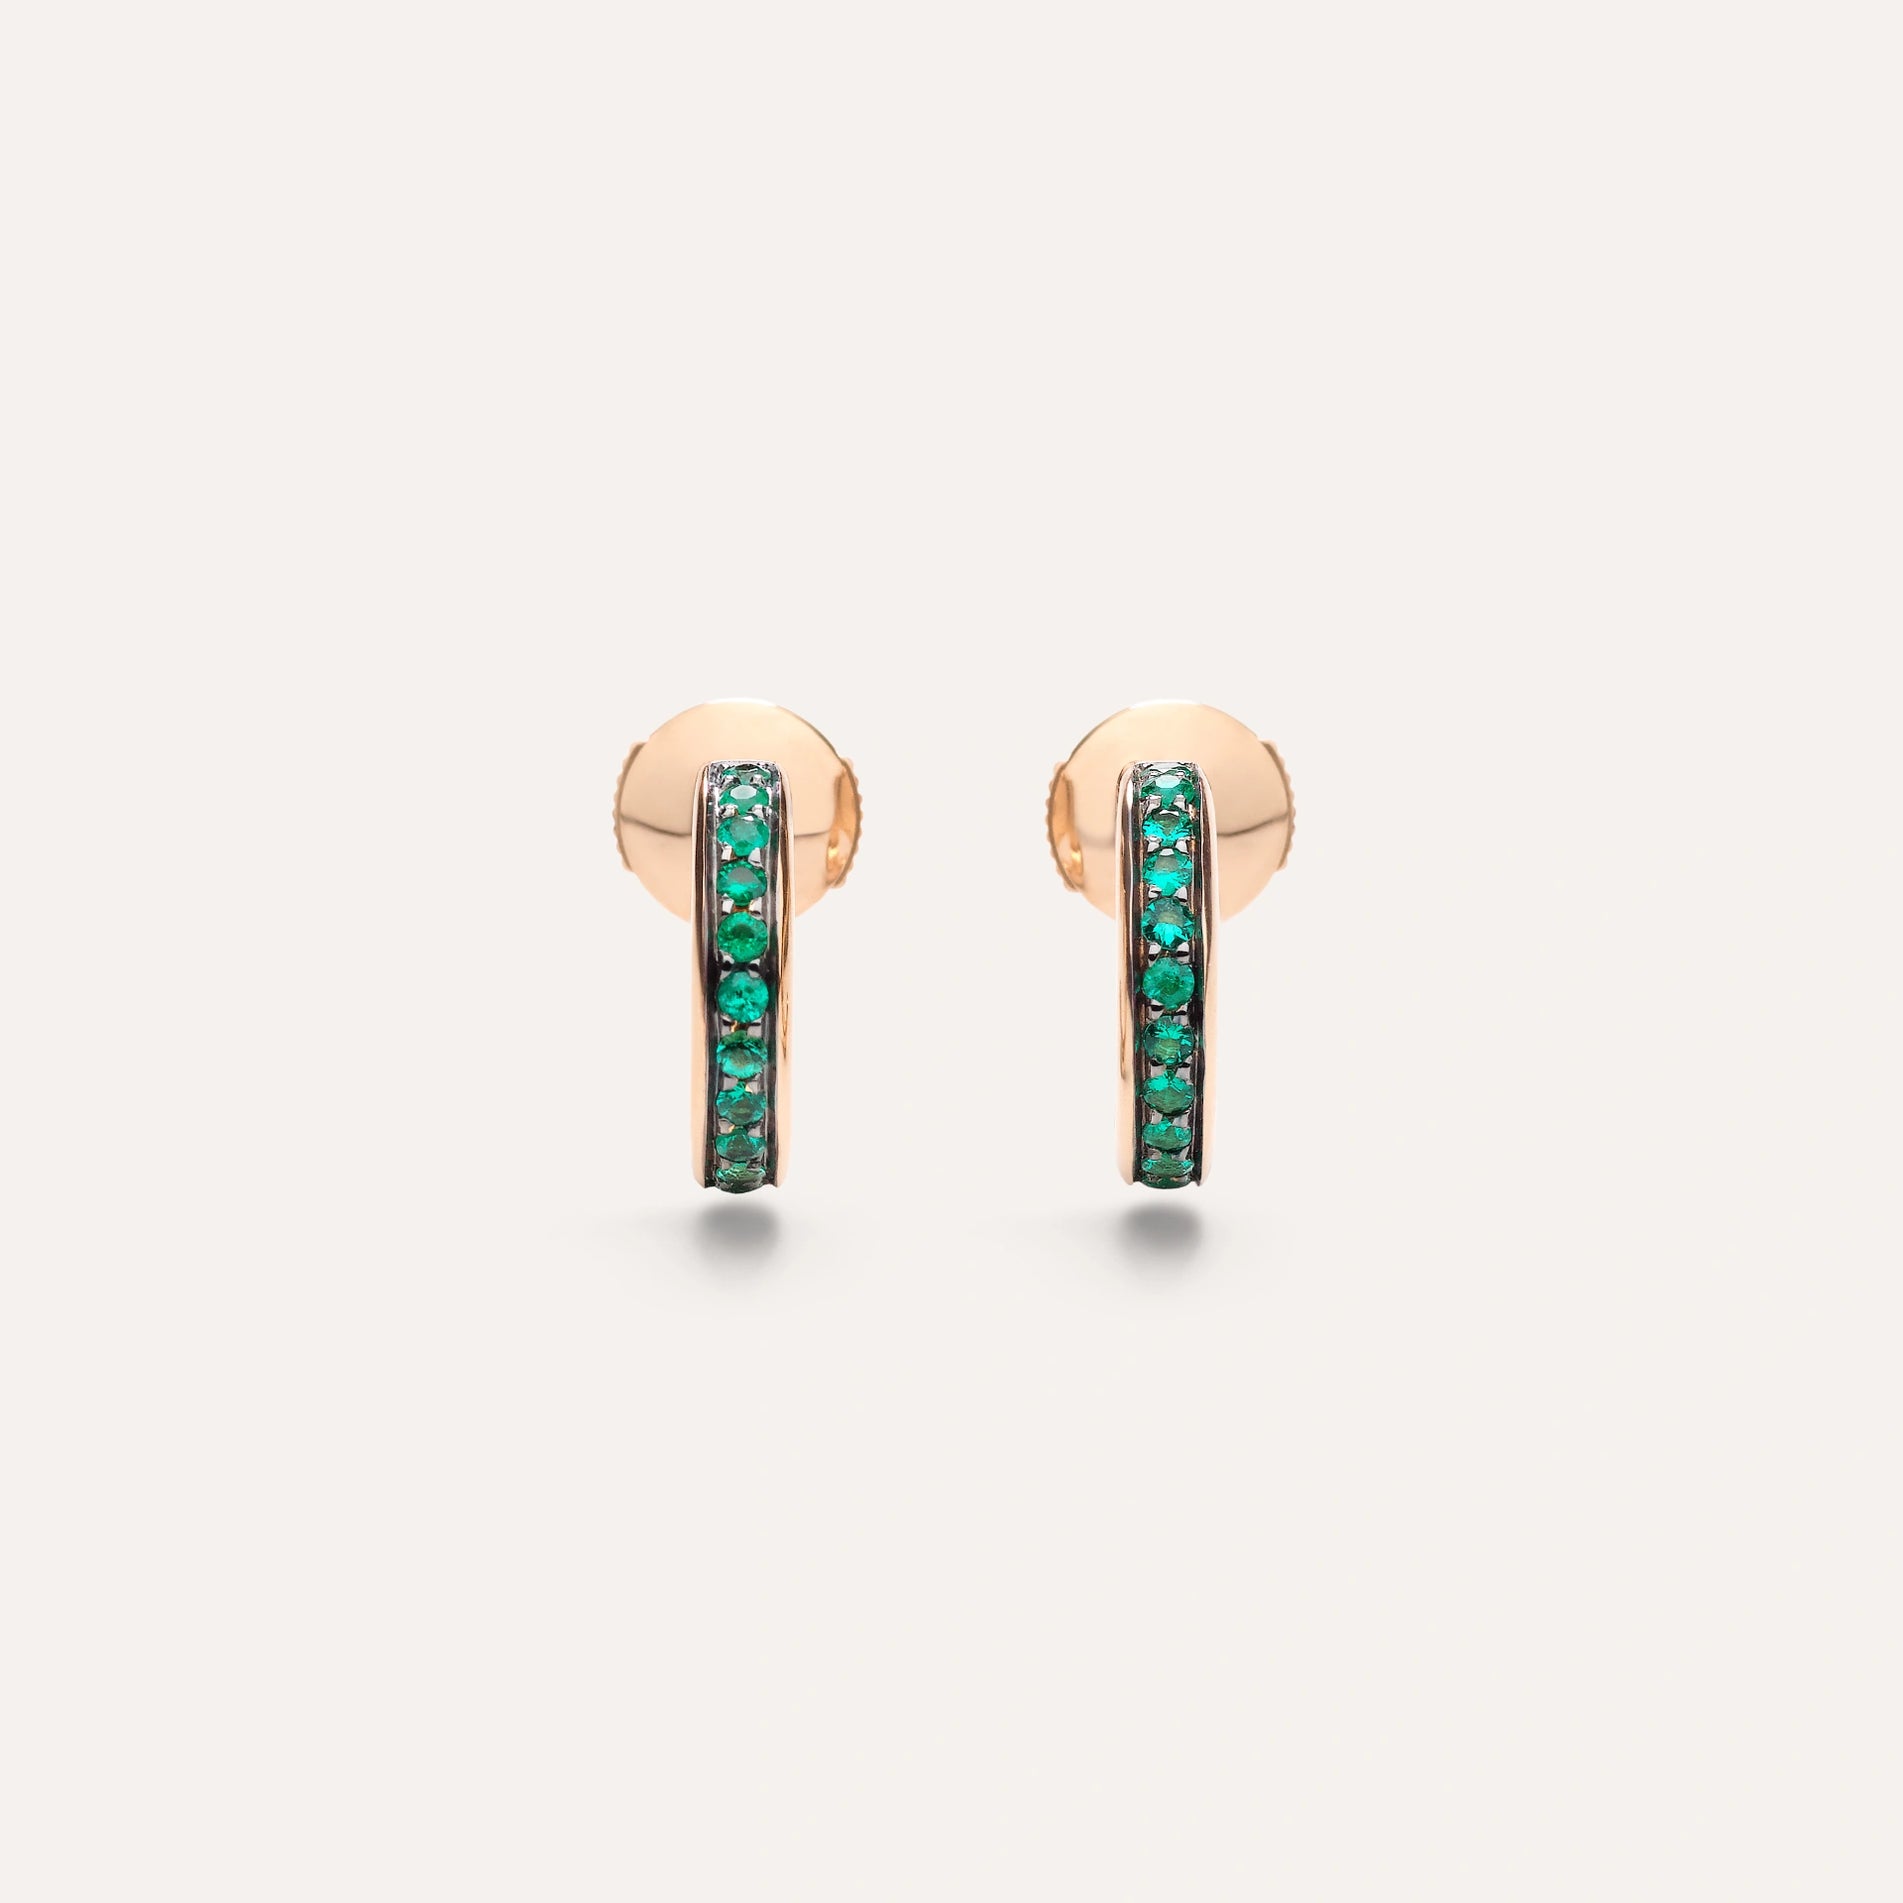 Pomellato Together Diamond Earrings in 18k Gold with Emeralds - Orsini Jewellers